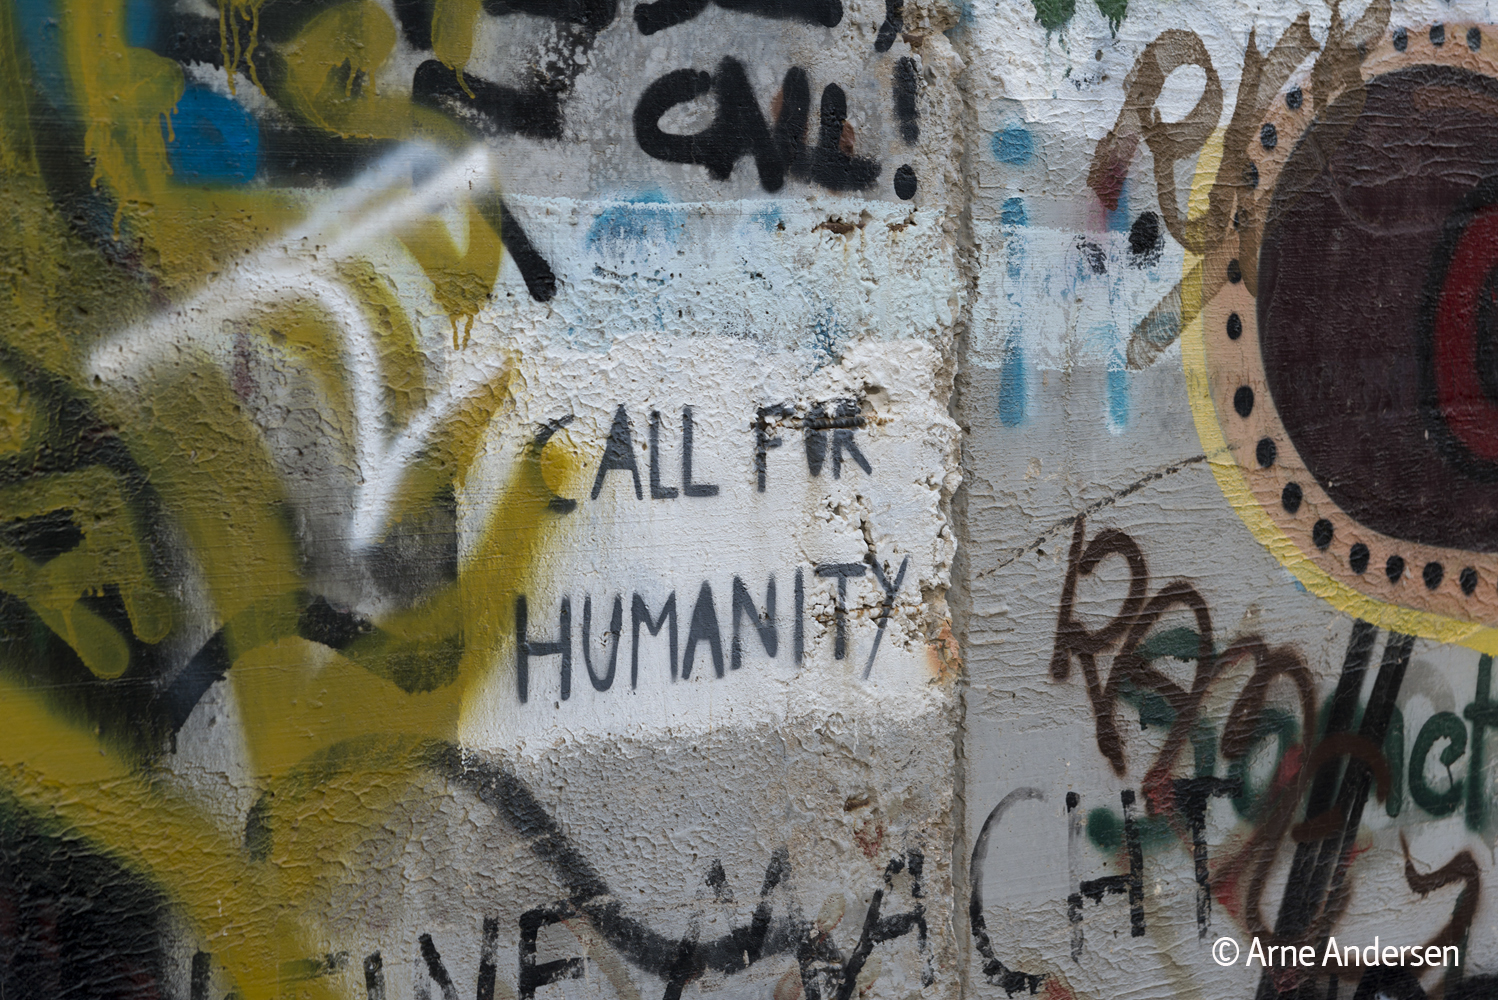 Call for Humanity